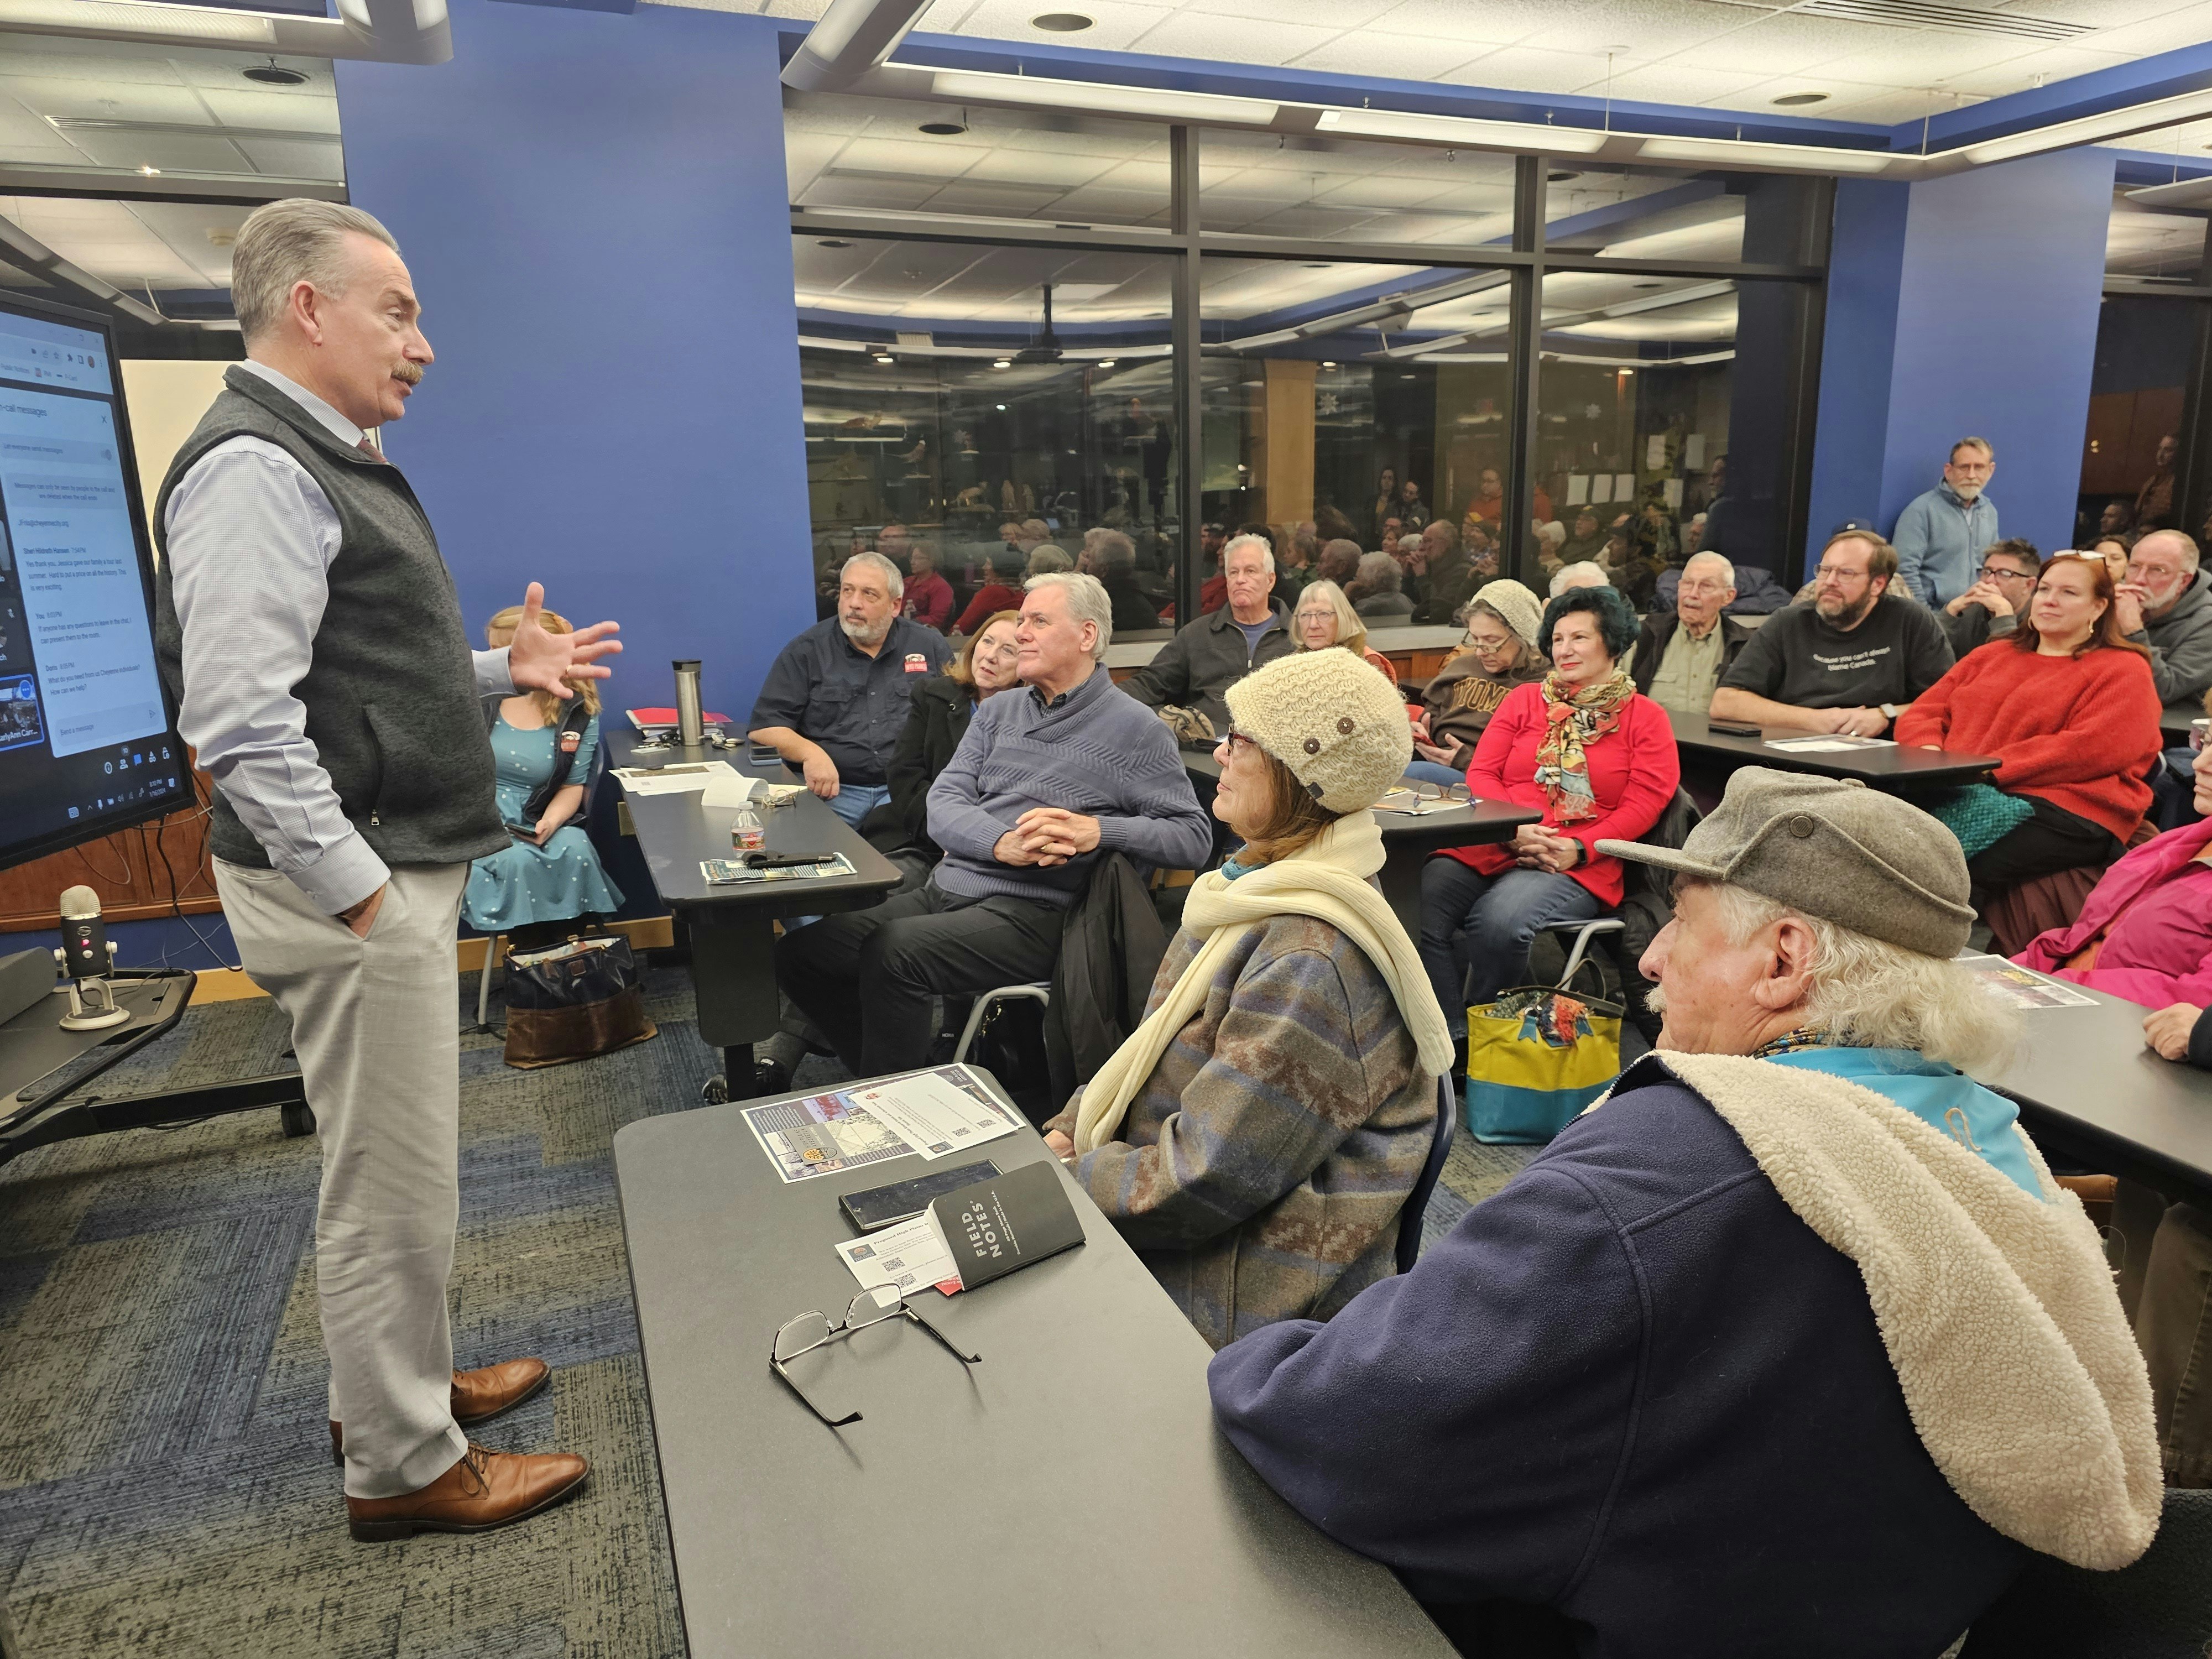 Cheyenne Mayor Patrick Collins talks about the High Plains Arboretum during a meeting at the Wyoming State Museum on Tuesday, the night before deliberations on a bill that would make the High Plains Arboretum a state historic site.